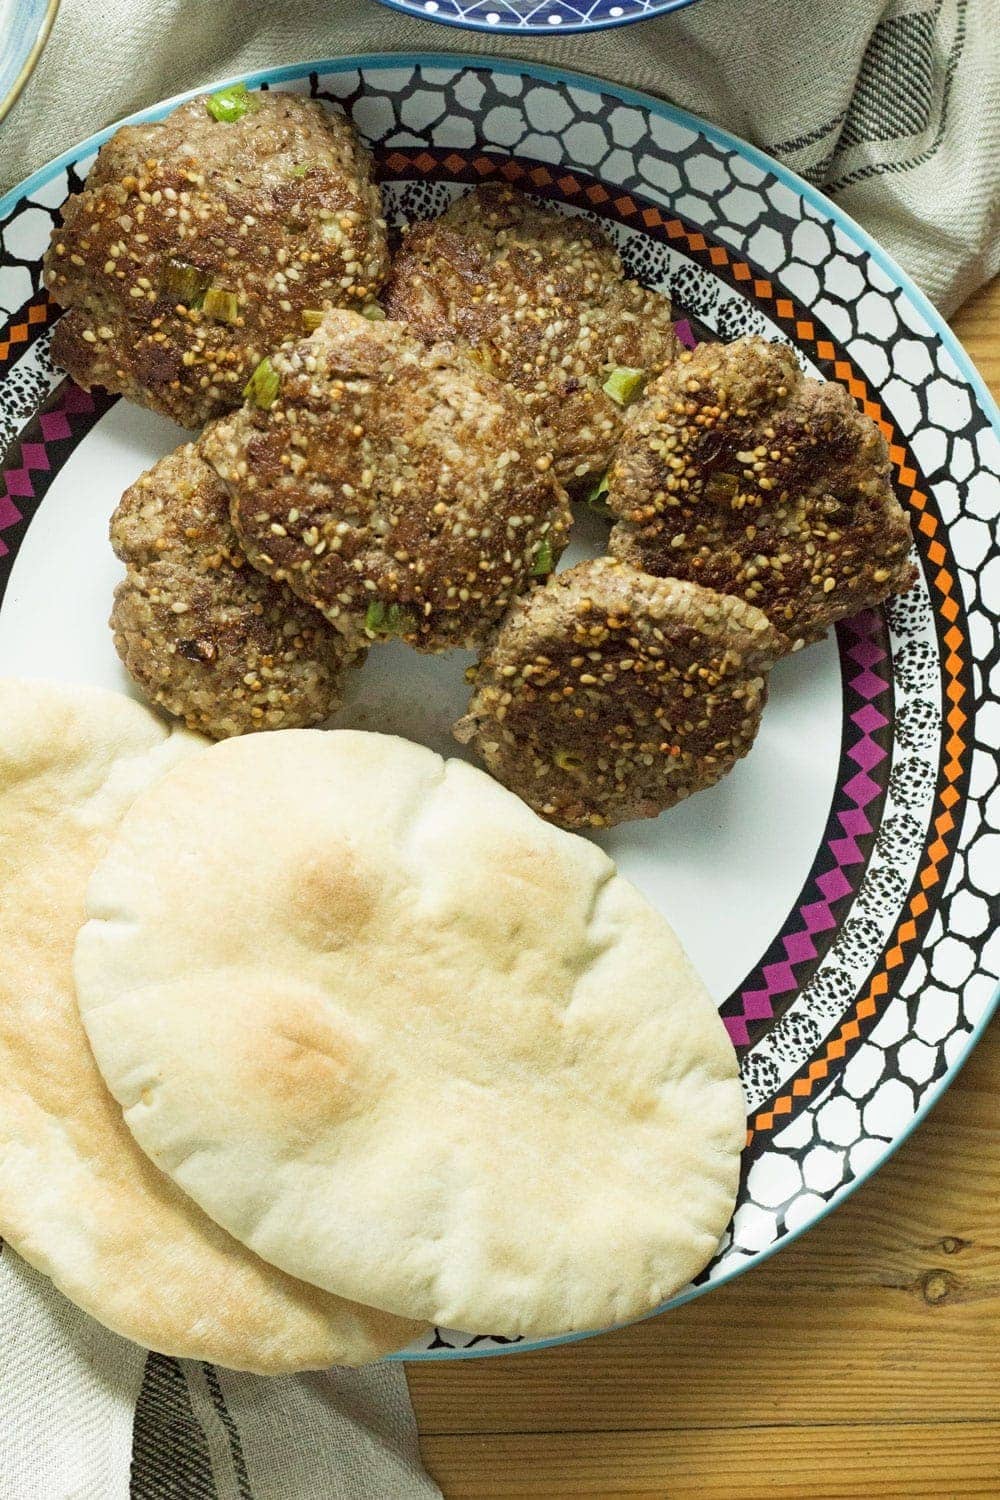 This sesame lamb recipe tastes delicious stuffed in a pitta with some cucumber and mint yoghurt drizzled on top and some pine nut rice on the side.